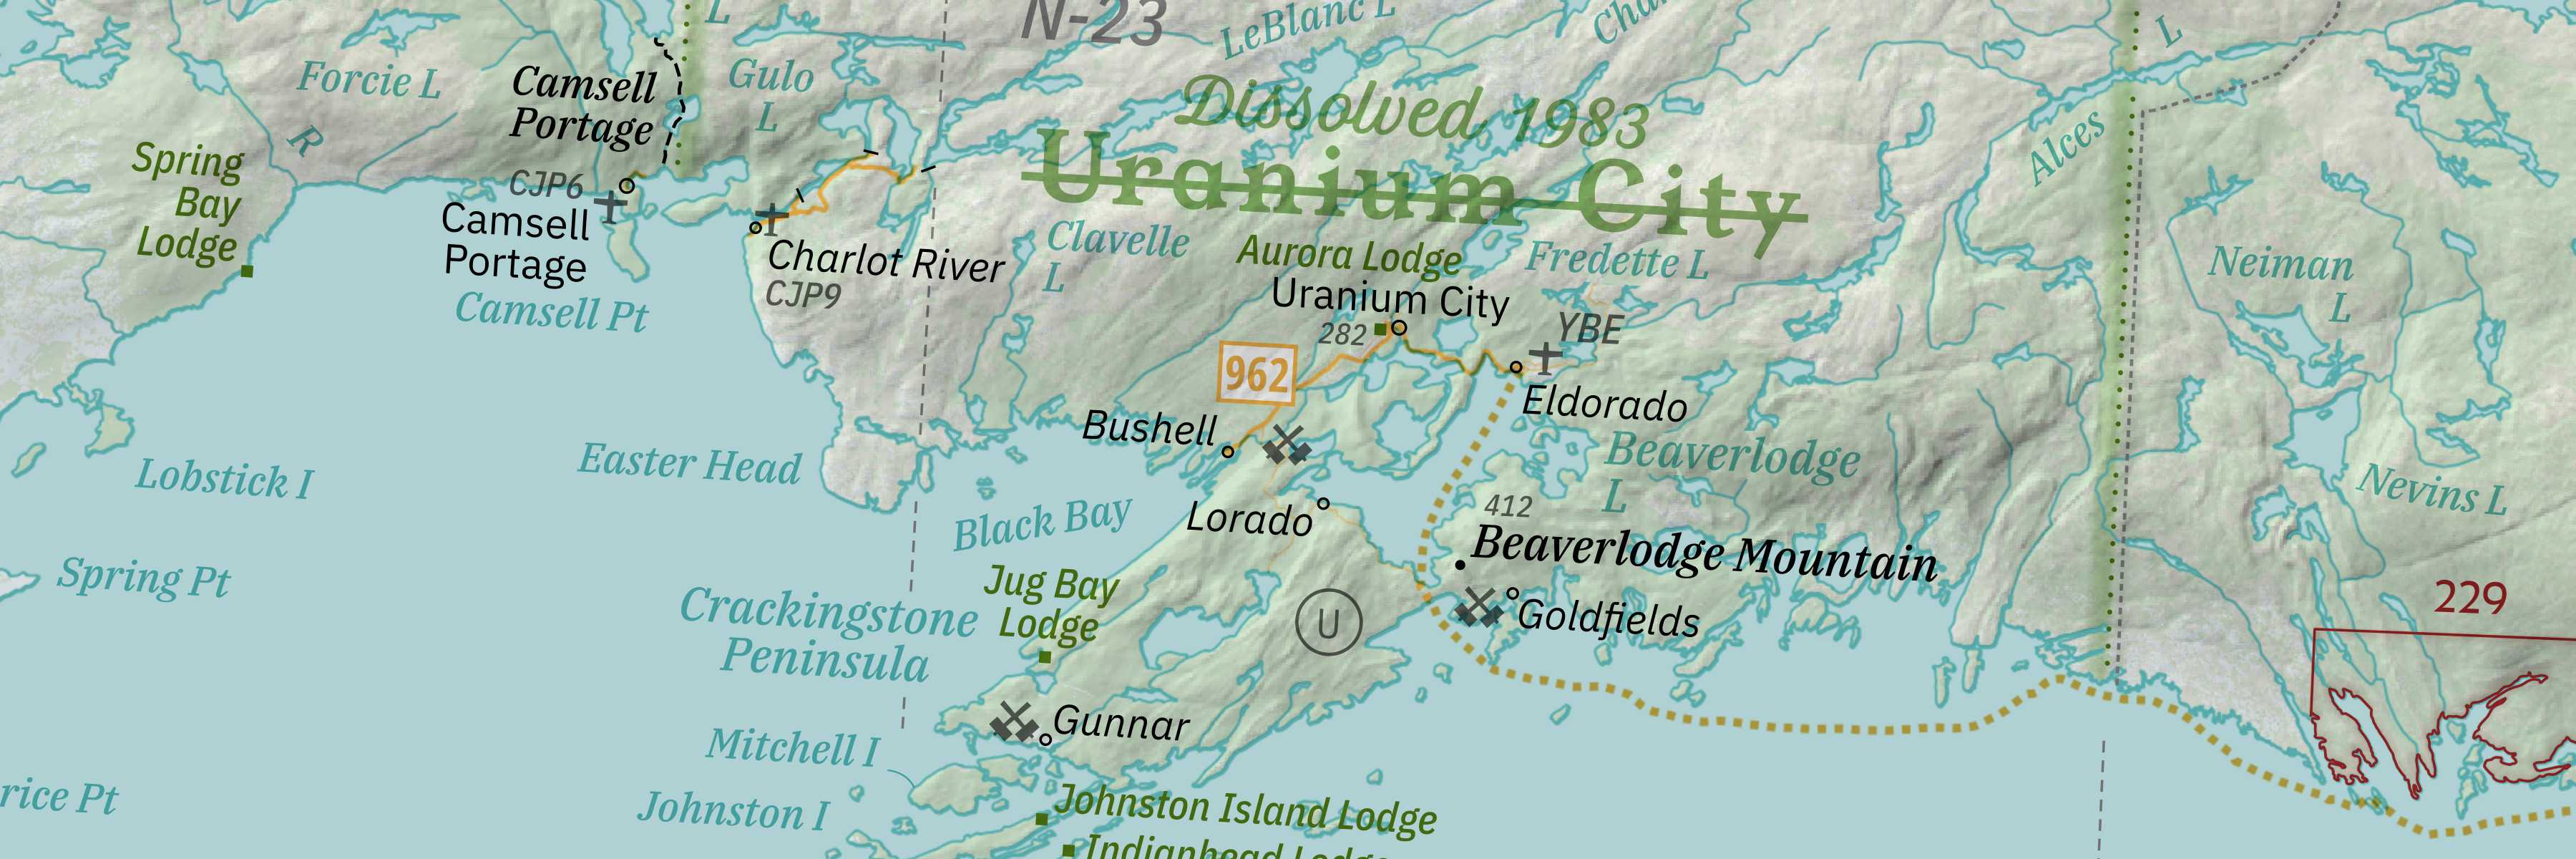 An excerpt of the wall map showing Uranium City and its surrounding mines.